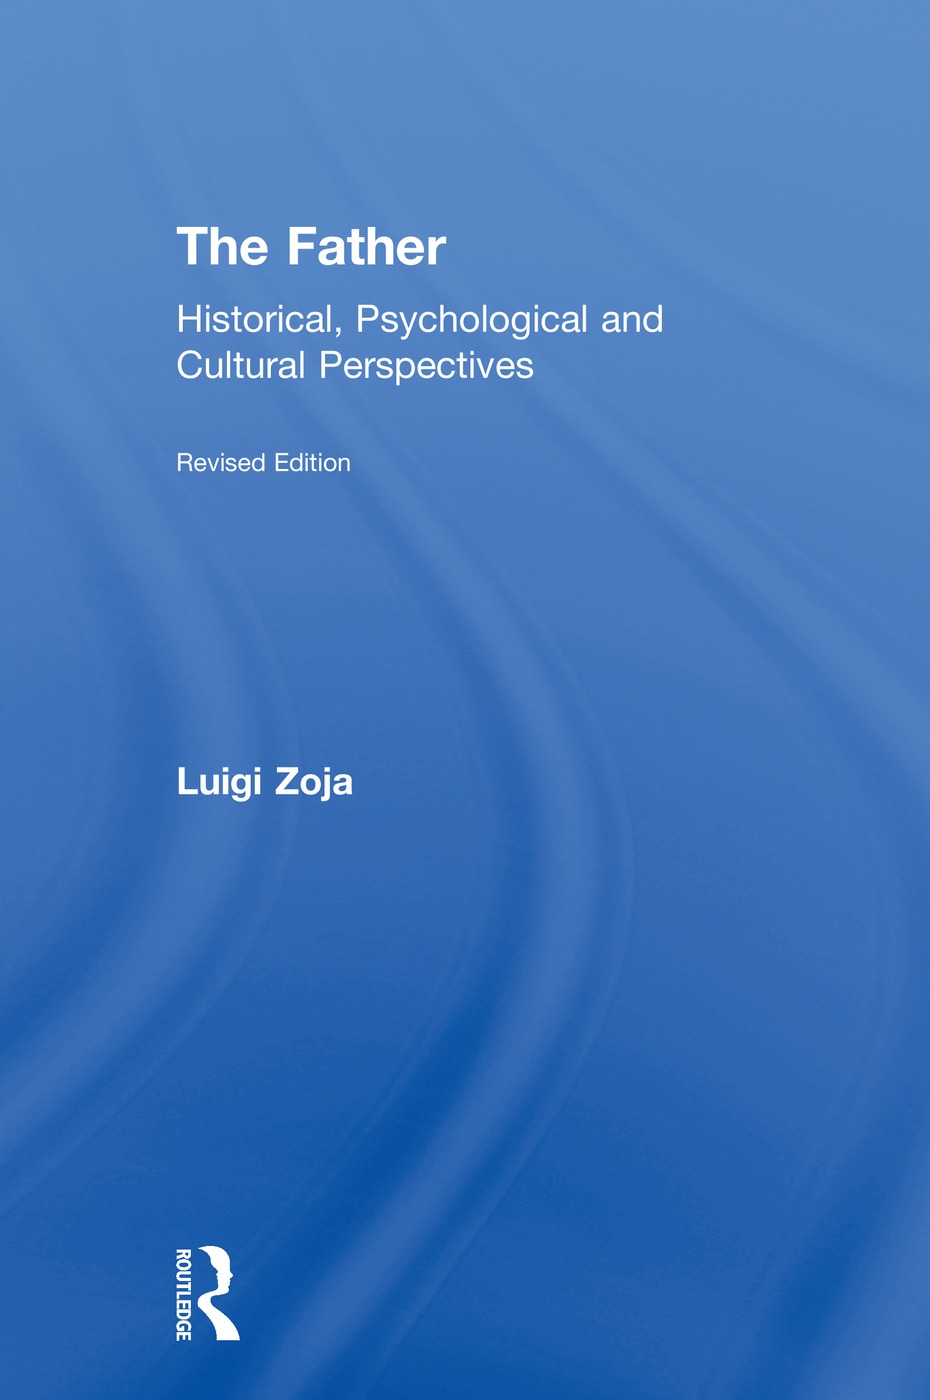 The Father: Historical, Psychological and Cultural Perspectives